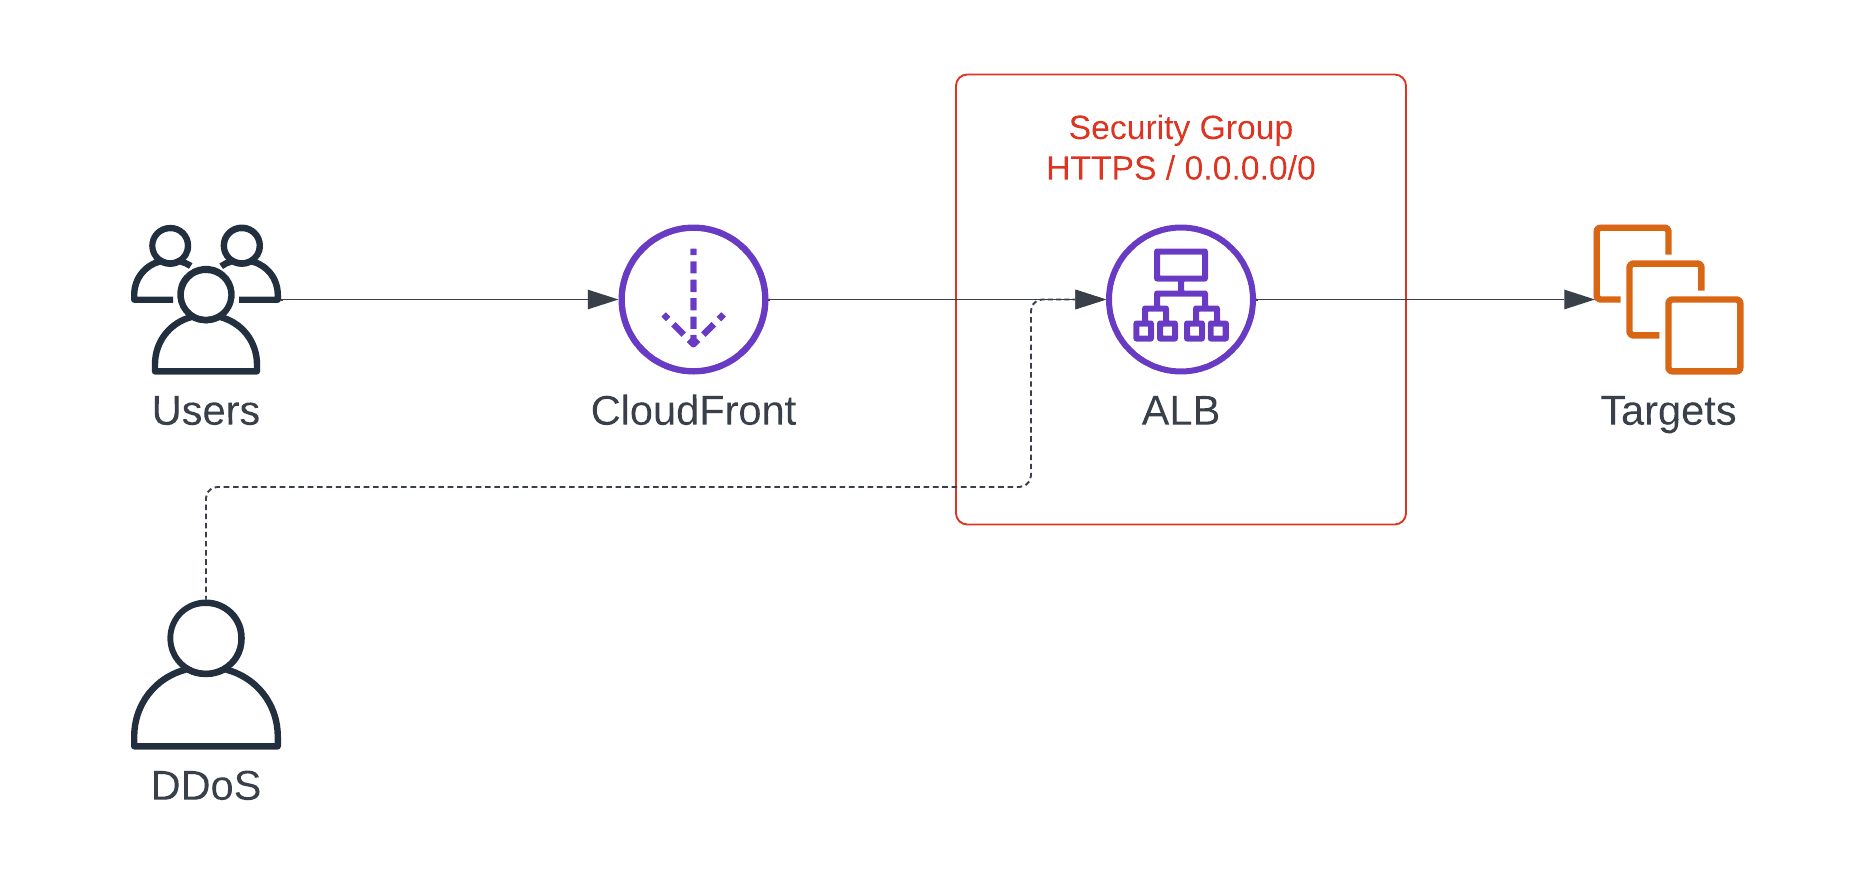 ALB accessible from anywhere